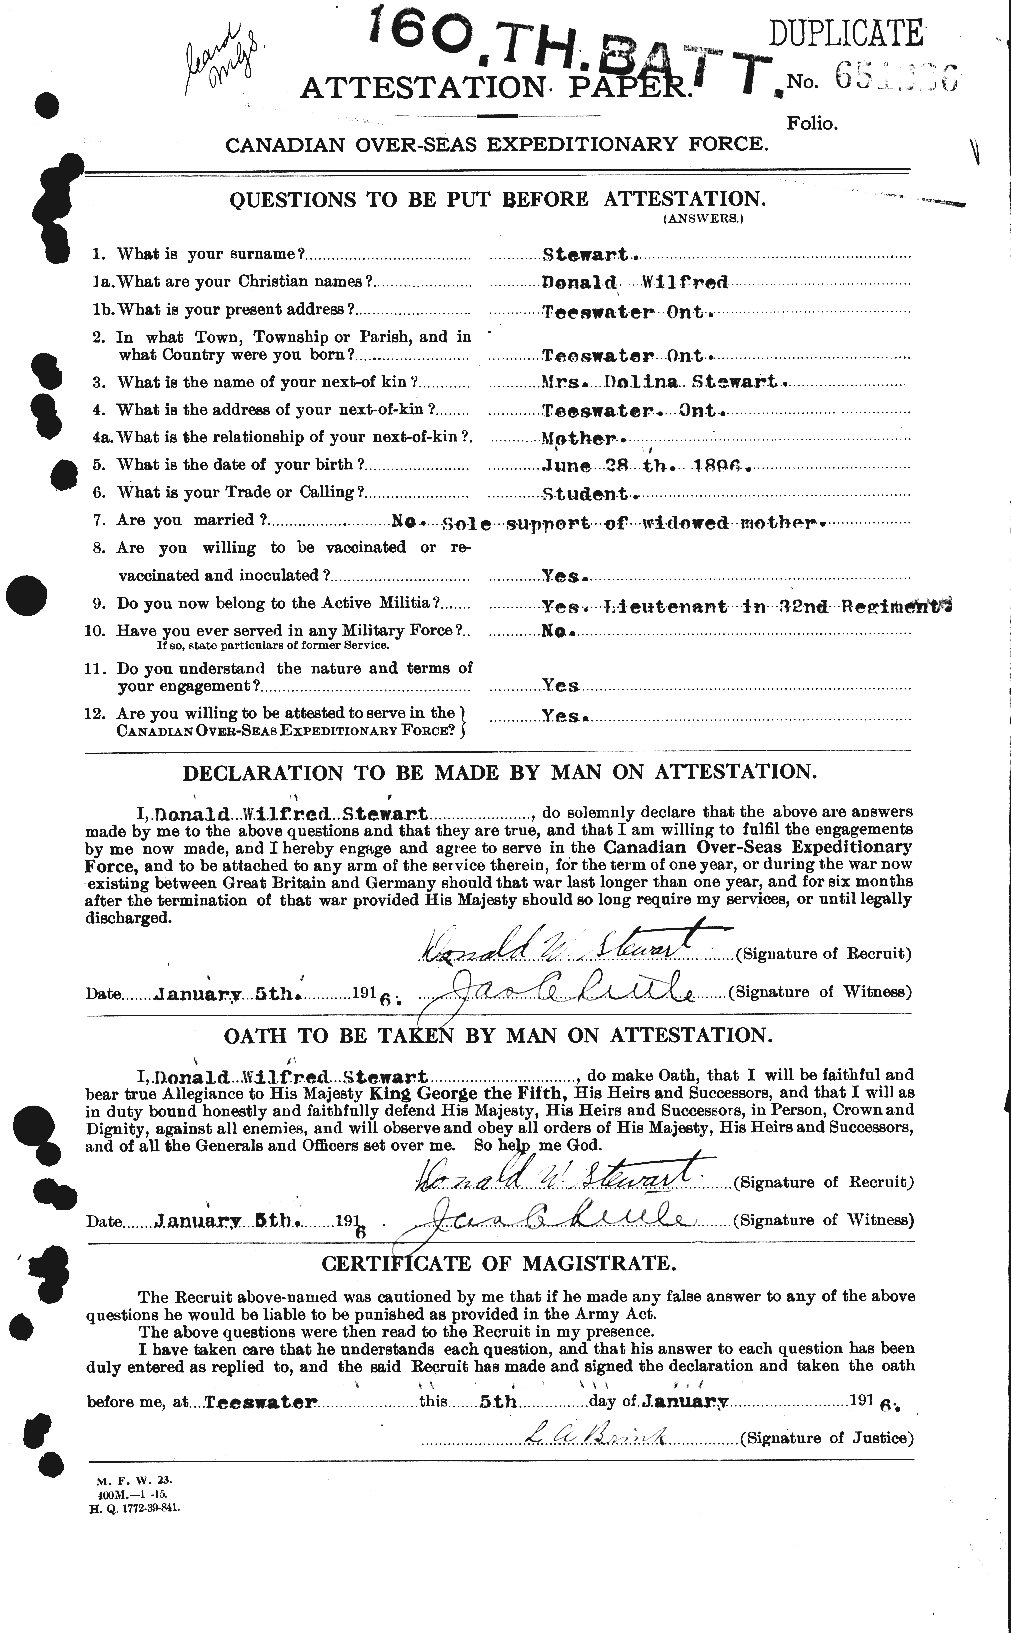 Personnel Records of the First World War - CEF 117747a